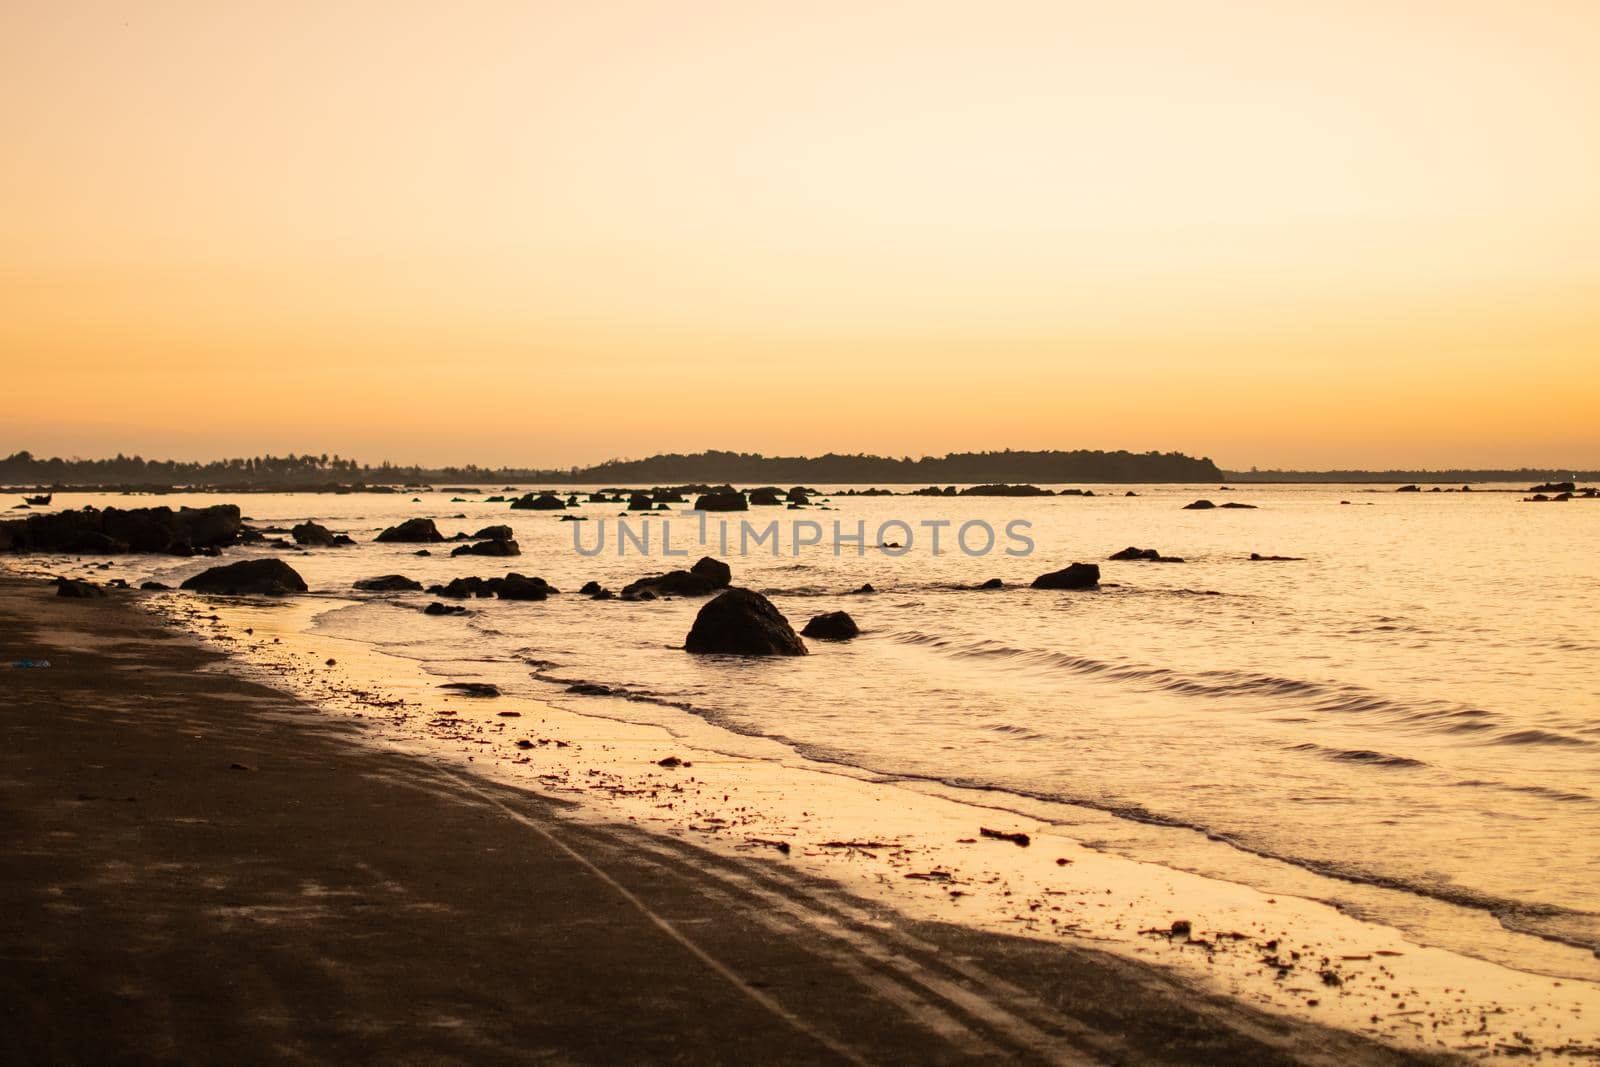 A bright golden orange sunset over a beach with rocks in the water waves near Ngwesaung beach, Irrawaddy, western Myanmar